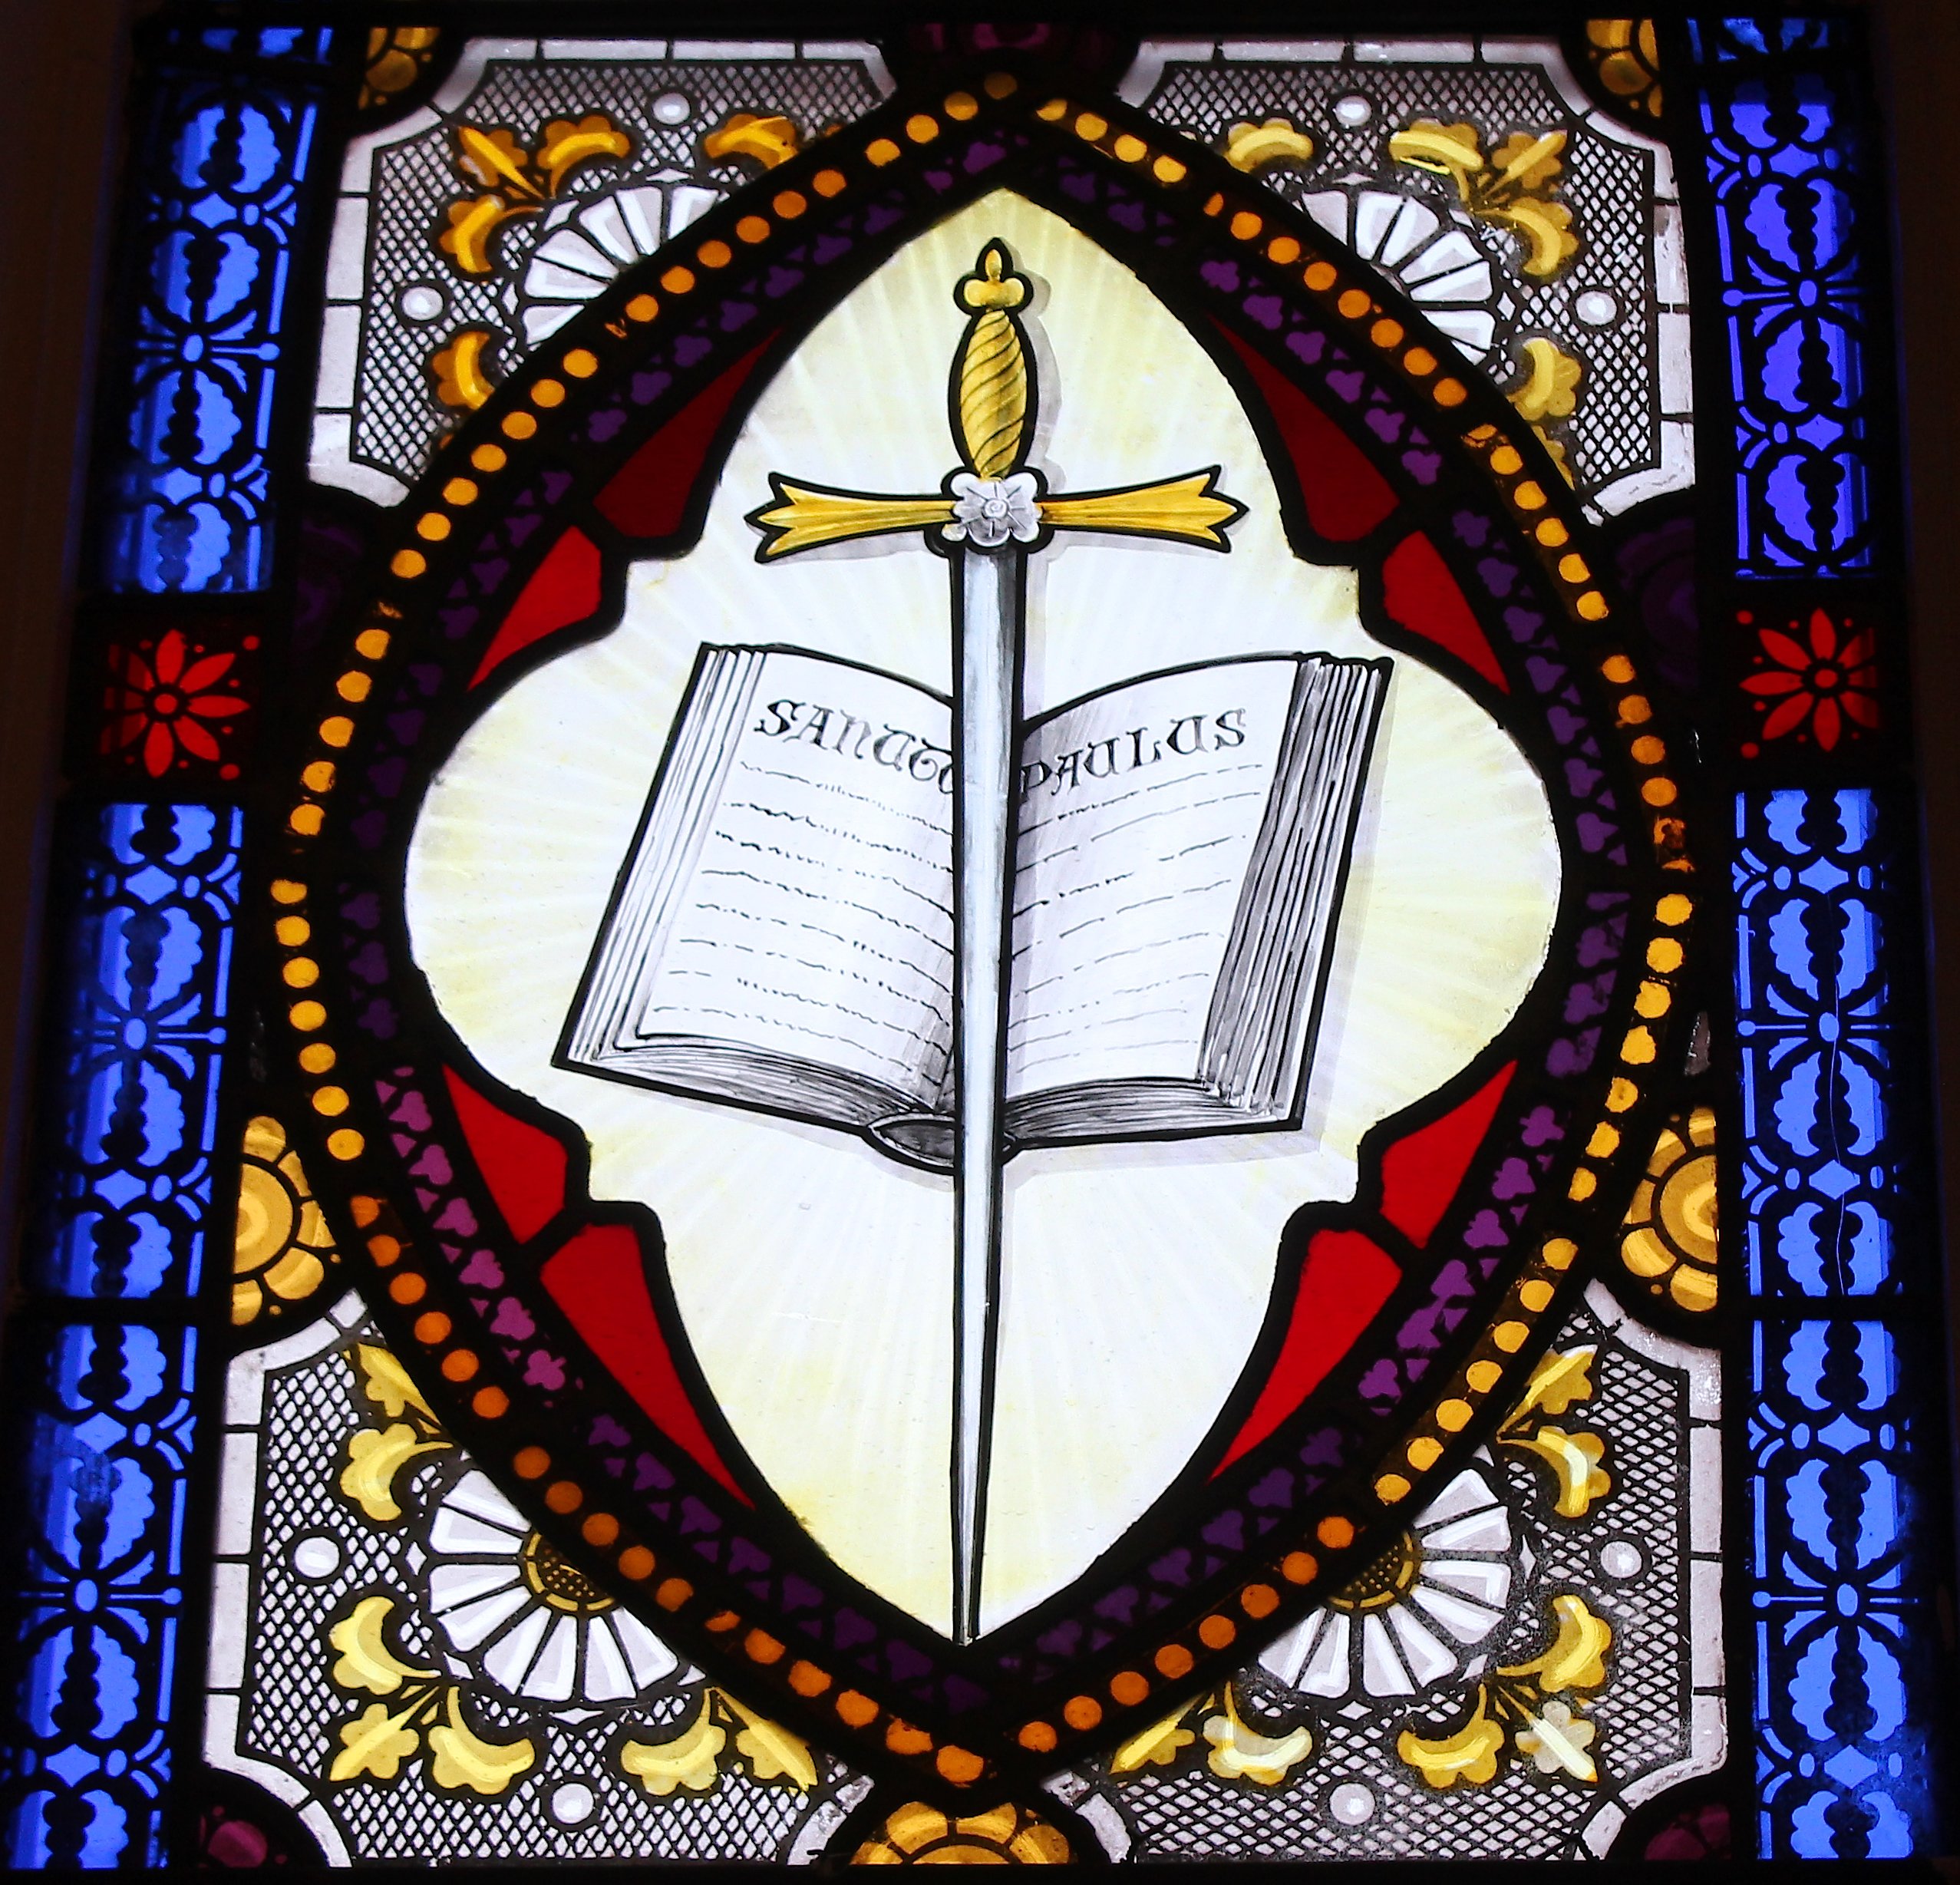 A stained glass windown of an open book with St. Paulus written on it, and a sword in fron of the book